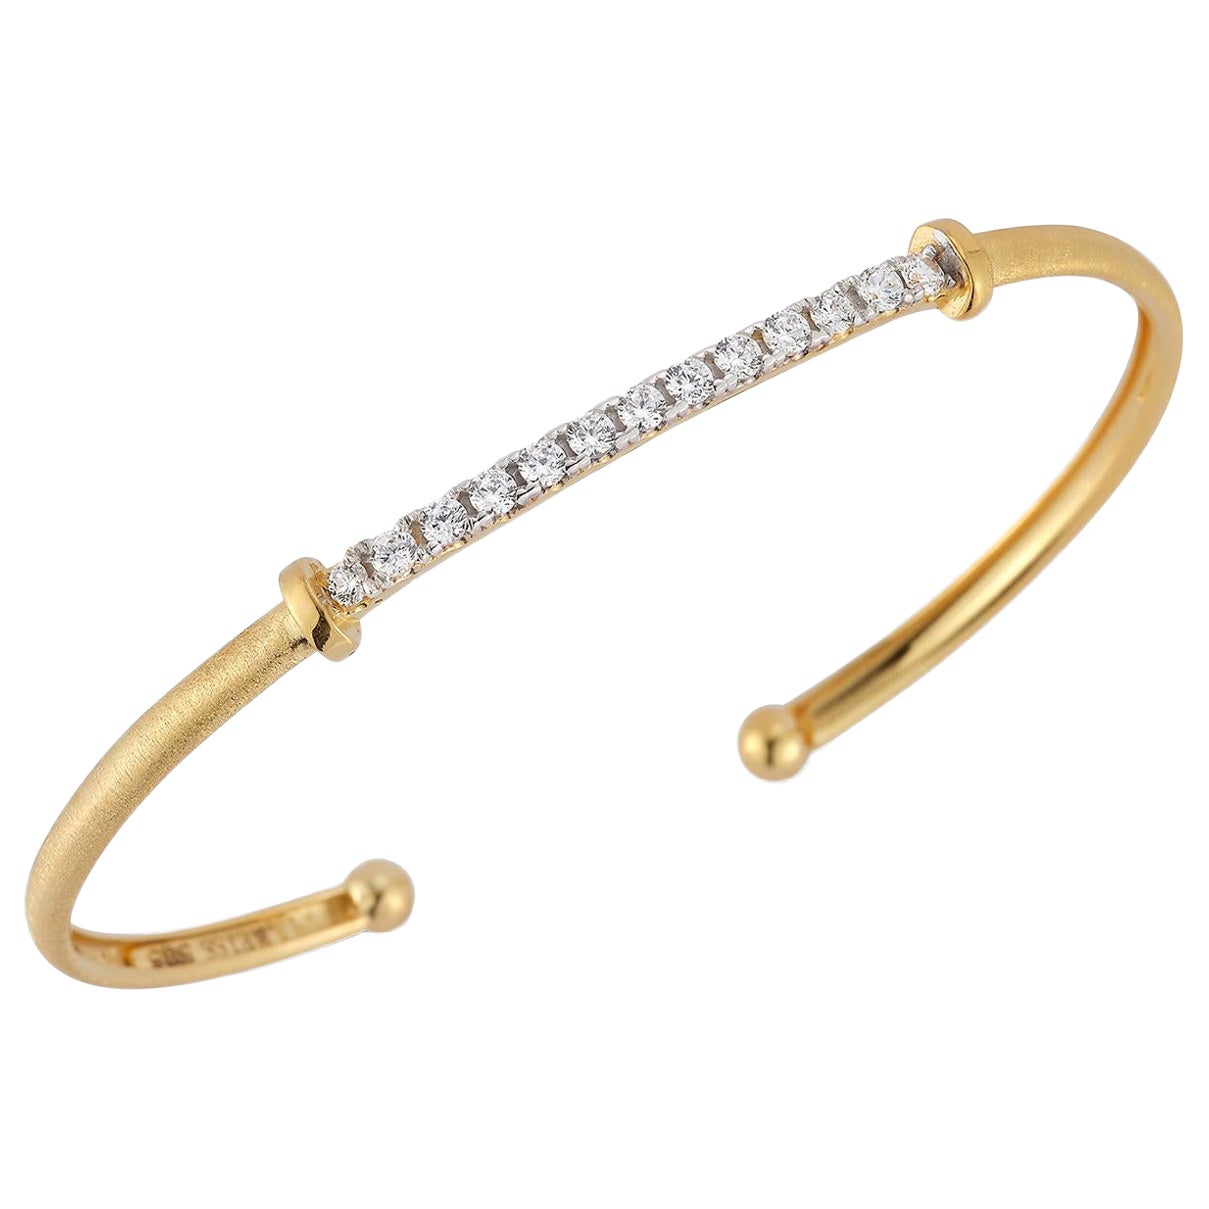 Hand-Crafted 14K Yellow Gold Flexible Bangle Bracelet. For Sale